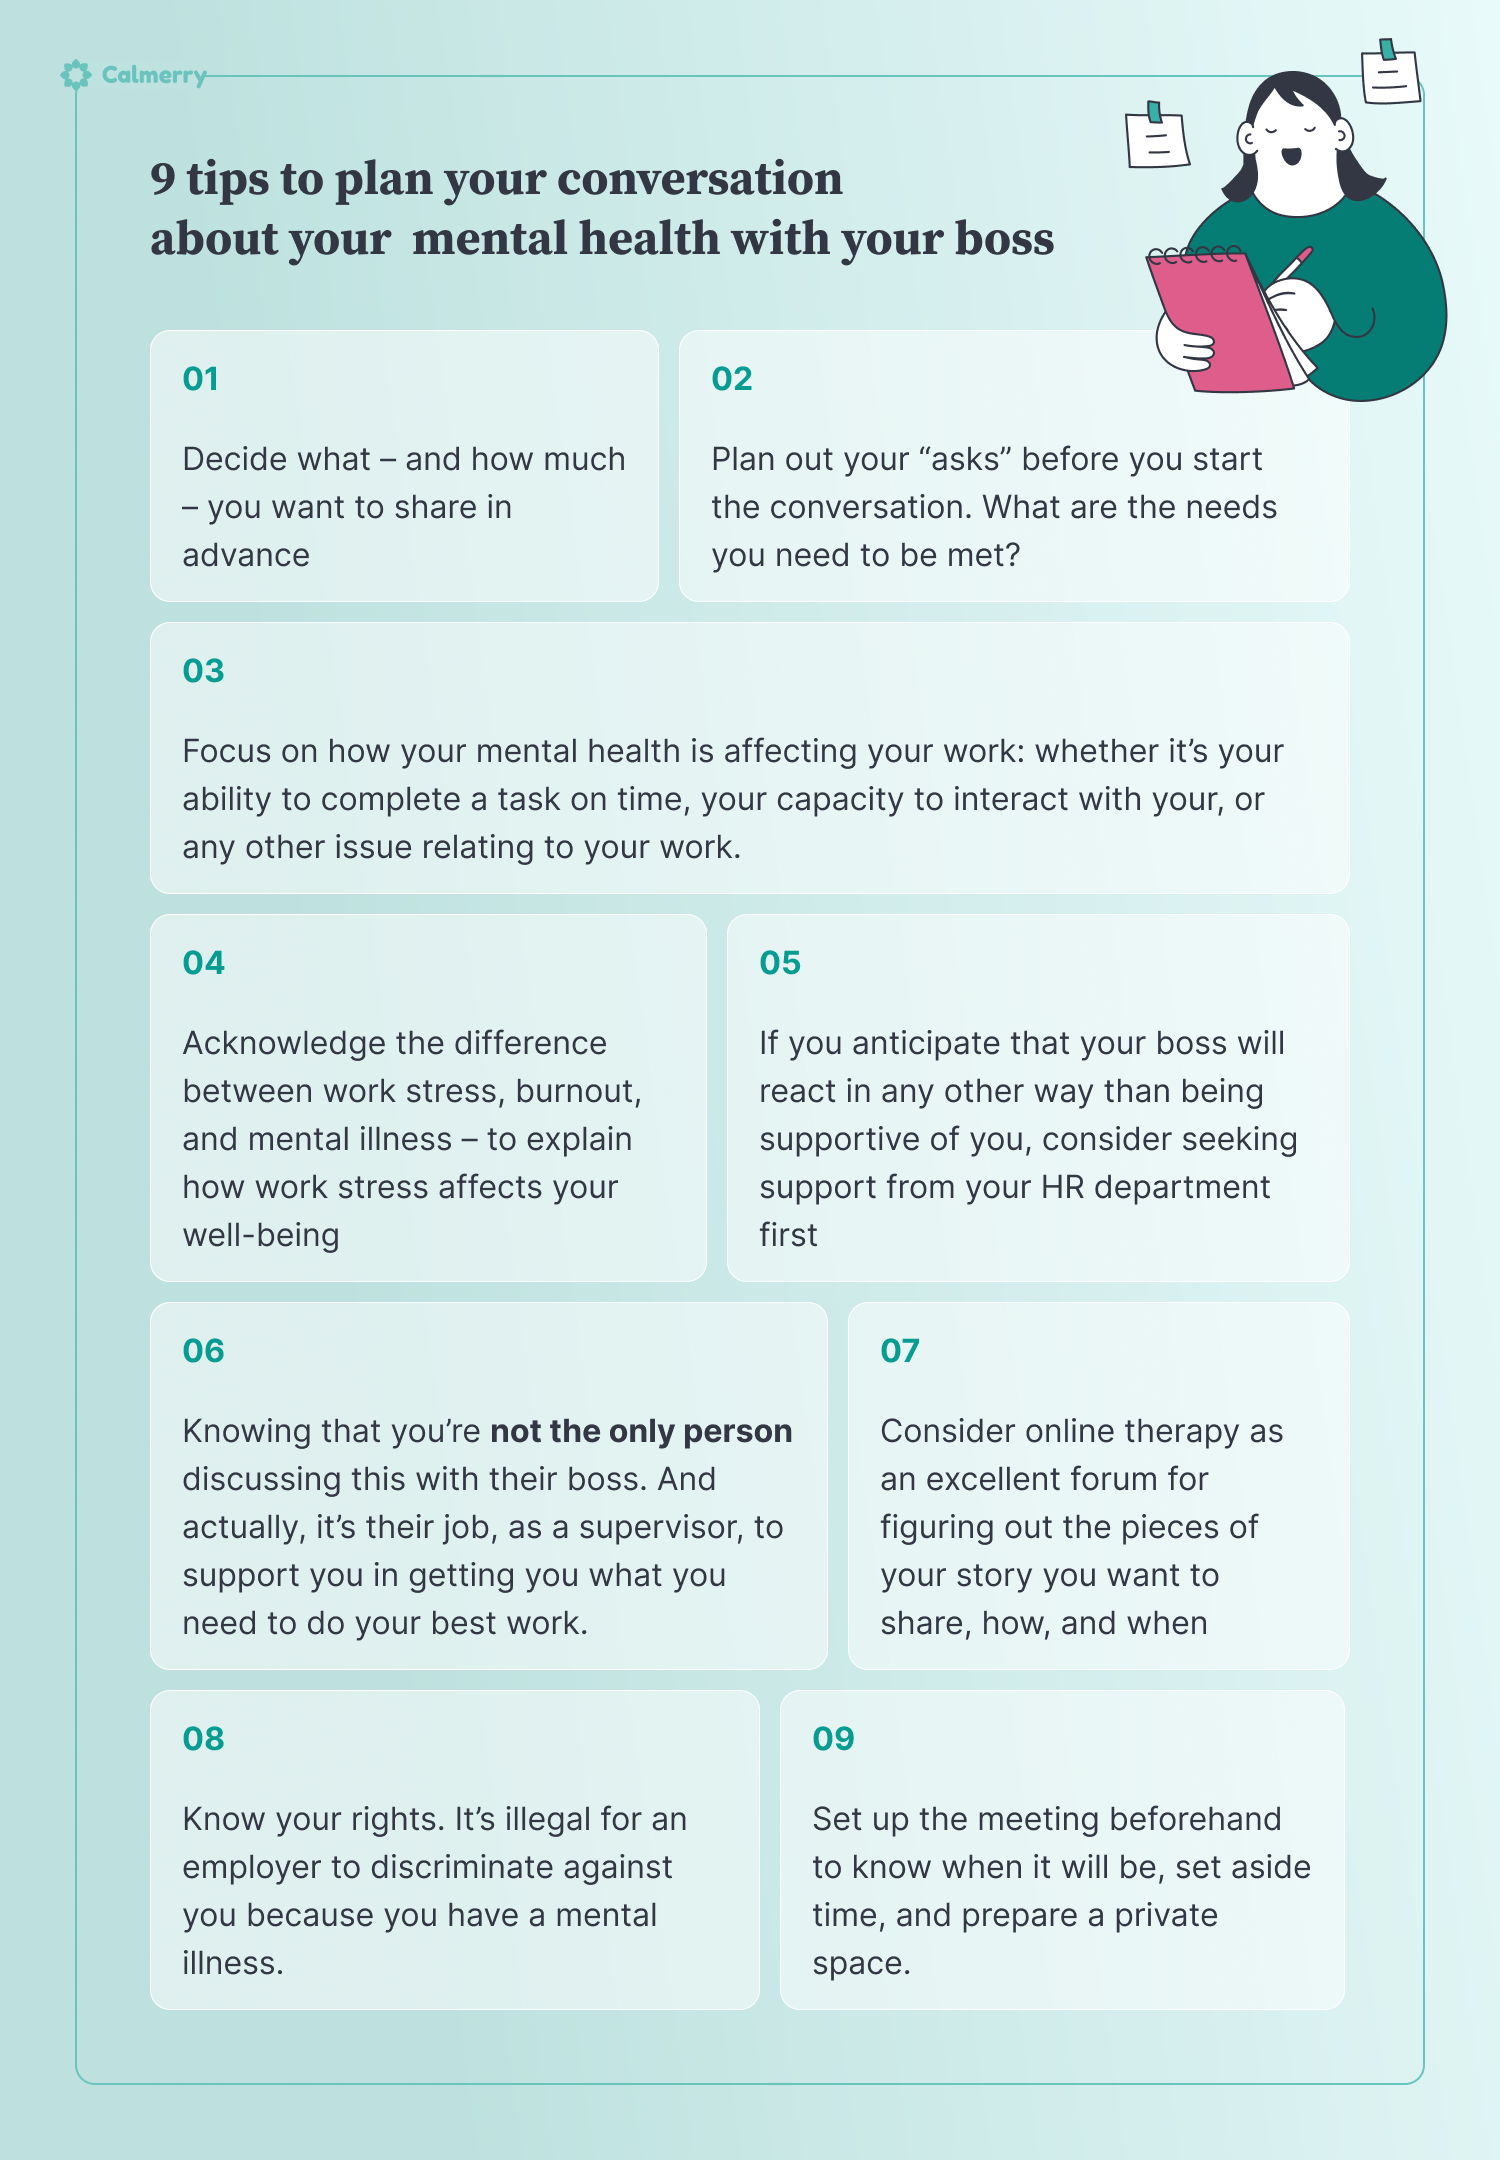 9 tips to plan your conversation about your mental health Decide what – and how much – you want to share in advance Focus on how your mental health is affecting your work: whether it’s your ability to complete a task on time, your capacity to interact with your, or any other issue relating to your work. Plan out your “asks” before you start the conversation. What are the needs you need to be met? Acknowledge the difference between work stress, burnout, and mental illness – to explain how work stress affects your well-being  Set up the meeting beforehand to know when it will be, set aside time, and prepare a private space. Know your rights. It’s illegal for an employer to discriminate against you because you have a mental illness. If you anticipate that your boss will react in any other way than being supportive of you, consider seeking support from your HR department first Knowing that you’re not the only person discussing this with their boss. And actually, it’s their job, as a supervisor, to support you in getting you what you need to do your best work. Consider online therapy as an excellent forum for figuring out the pieces of your story you want to share, how, and when